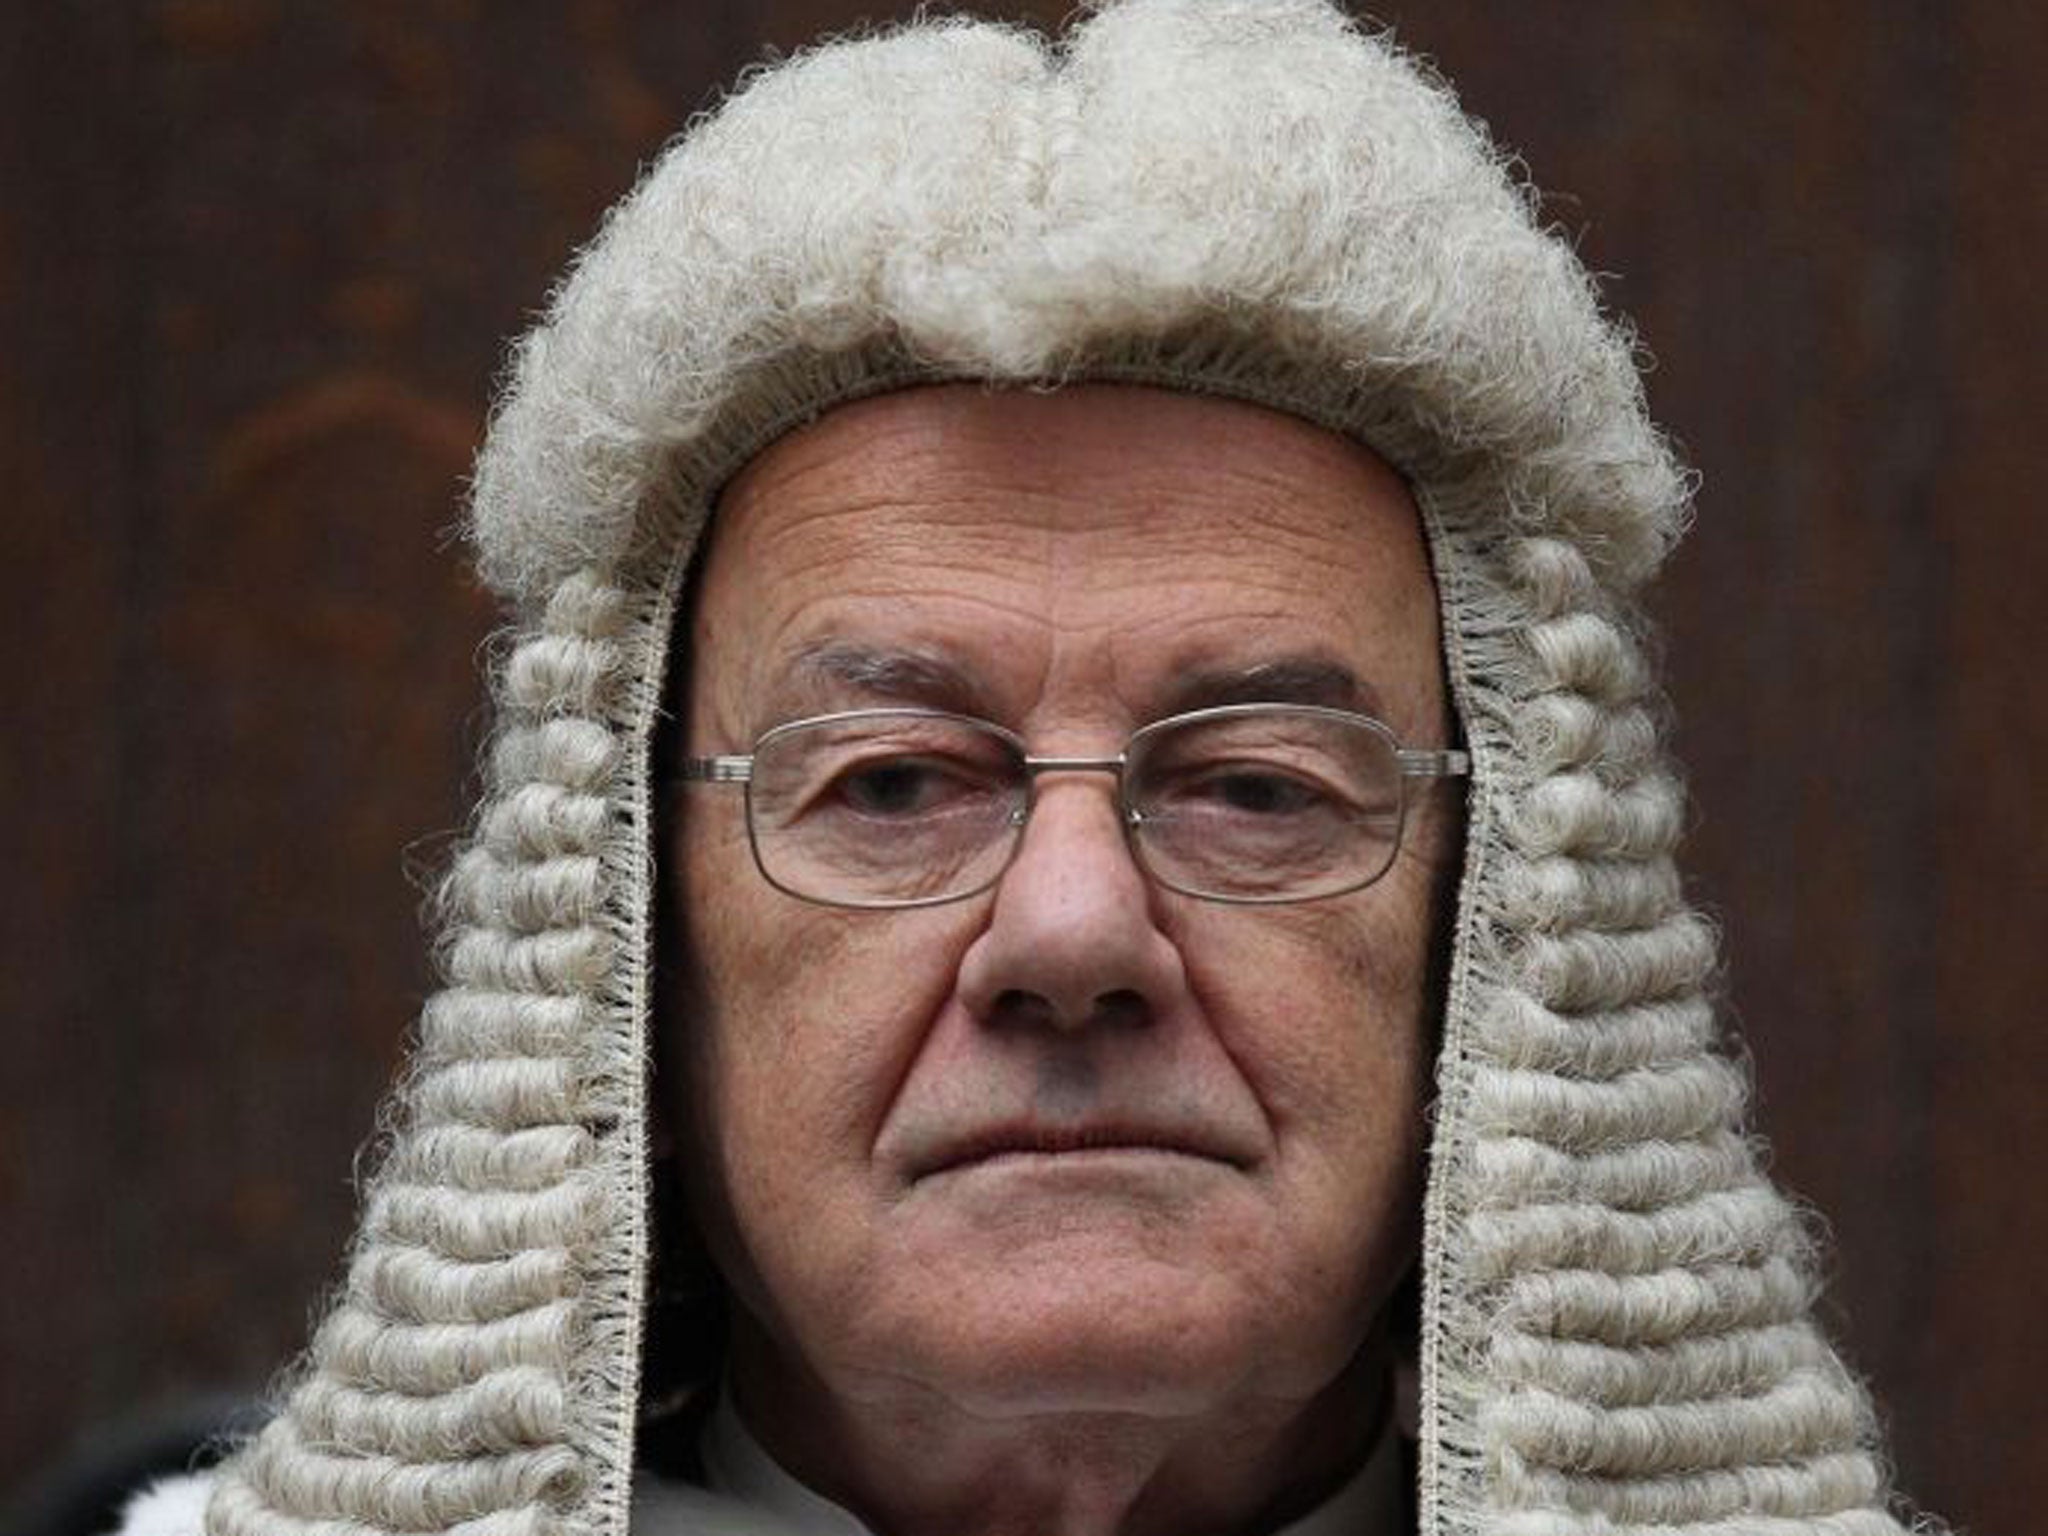 The Lord Chief Justice, Lord Judge, says judges will receive special training in order to preside over complex child sex abuses